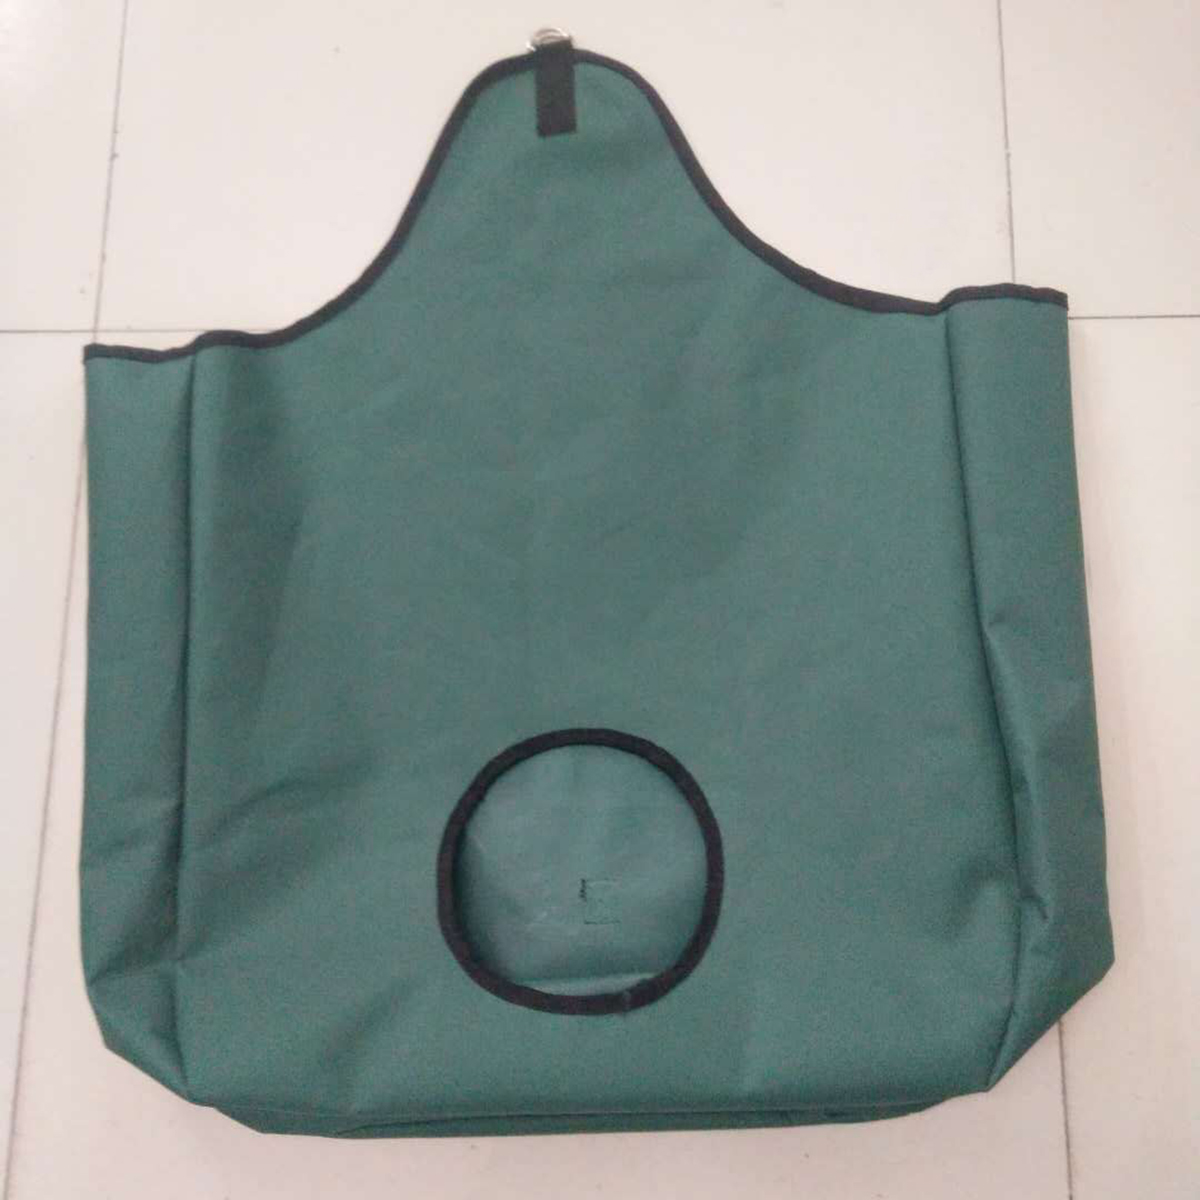 600D-Oxford-Cloth-Horse-Hay-Bag-Feeder-Net-With-Cut-Out-Hole-Reduce-Wastage-Farm-Supplies-1337101